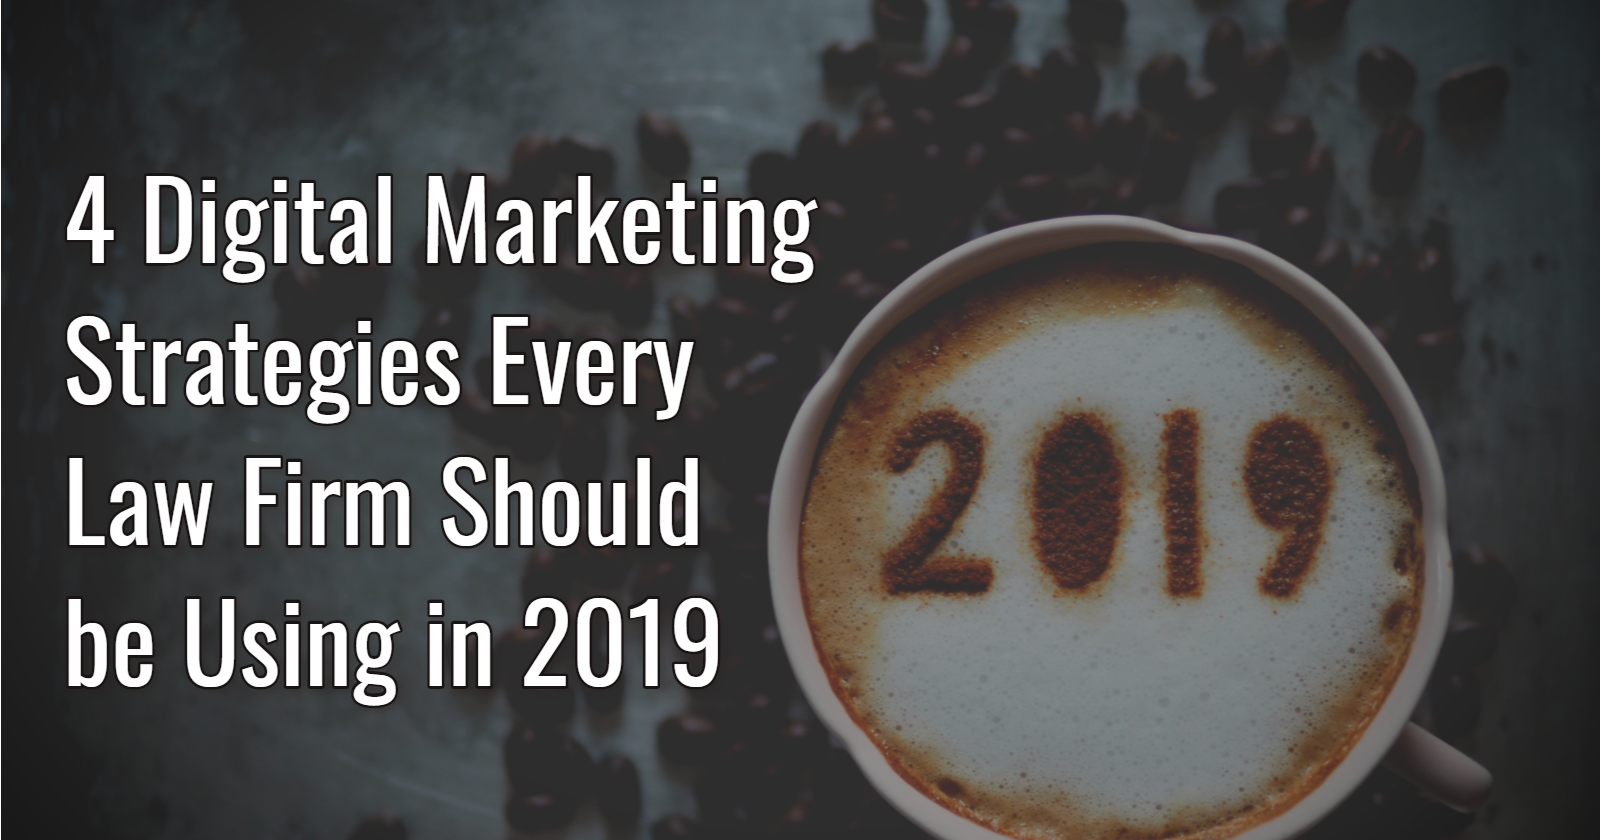 4-Digital-Marketing-Strategies-Every-Law-Firm-Should-be-Using-in-2019.png